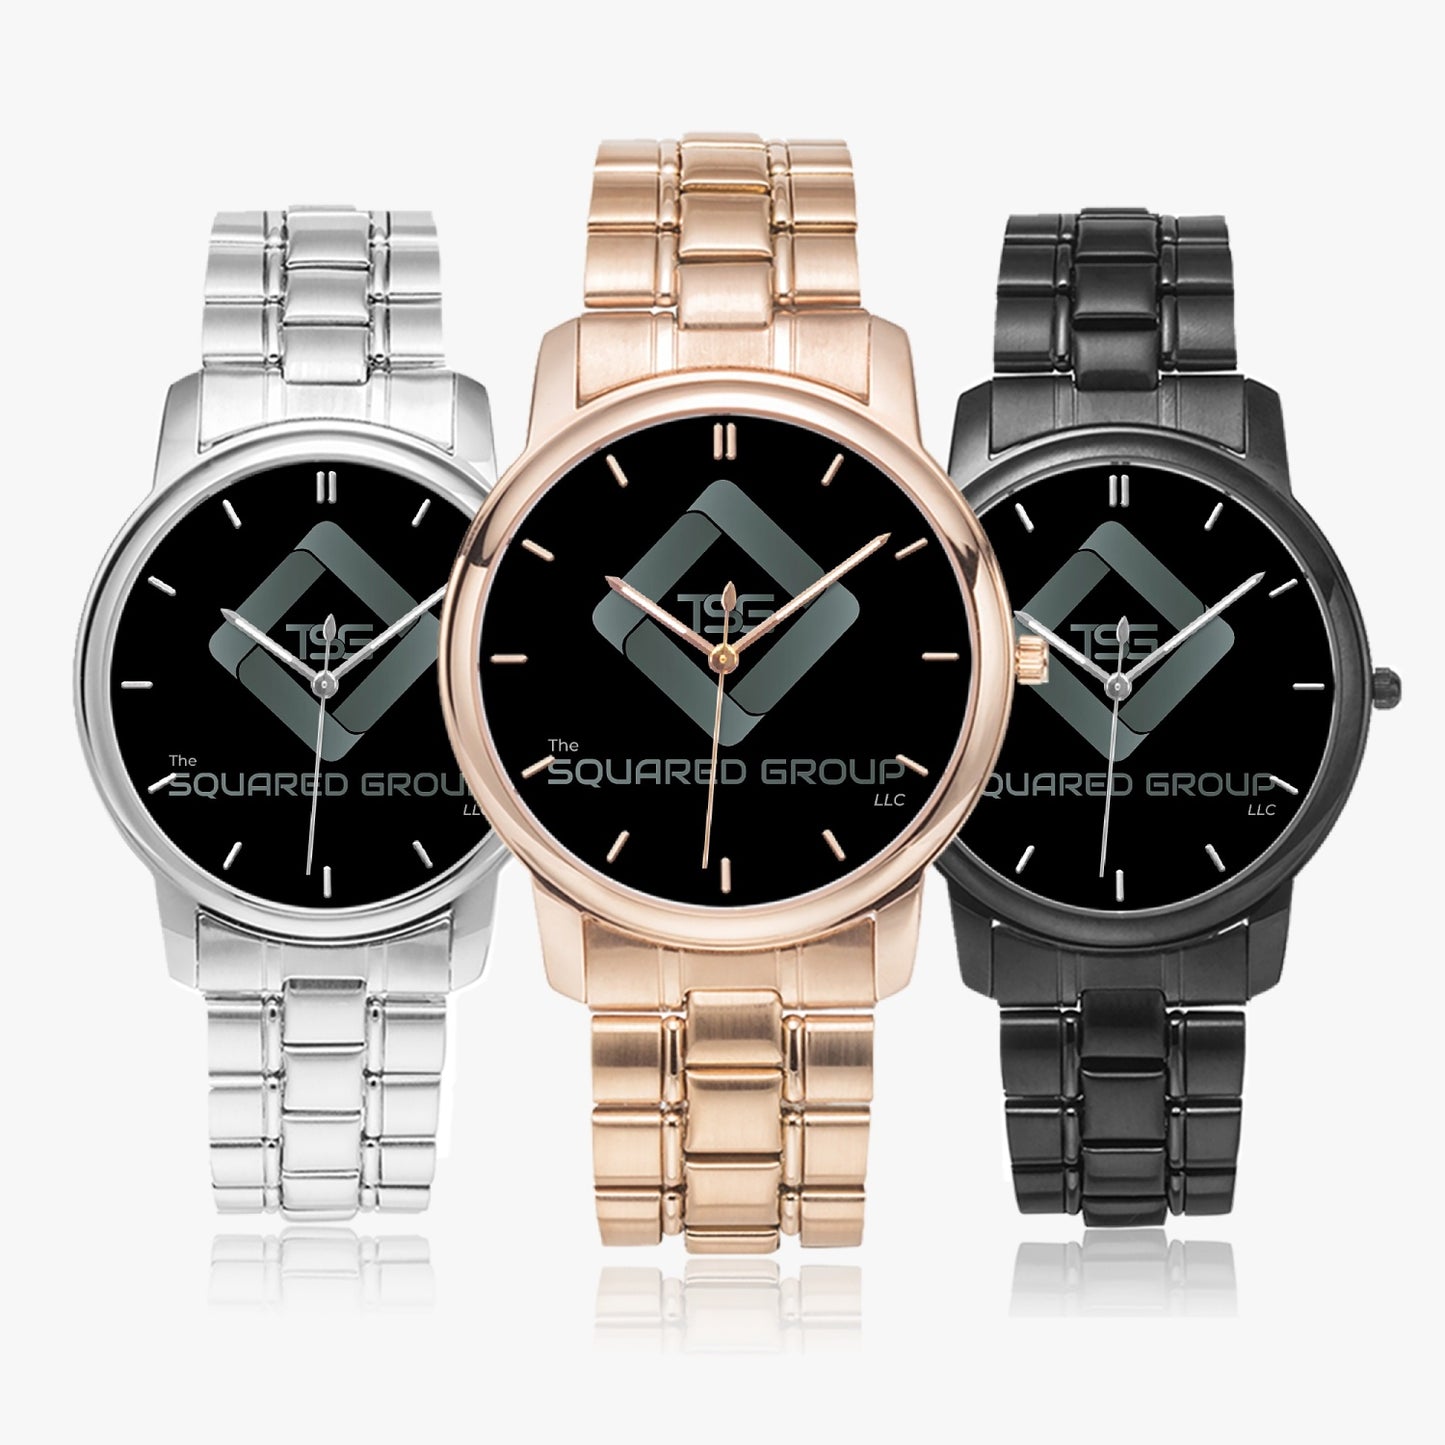 The Squared Group, LLC- Folding Clasp Type Stainless Steel Quartz Watch (With Indicators)